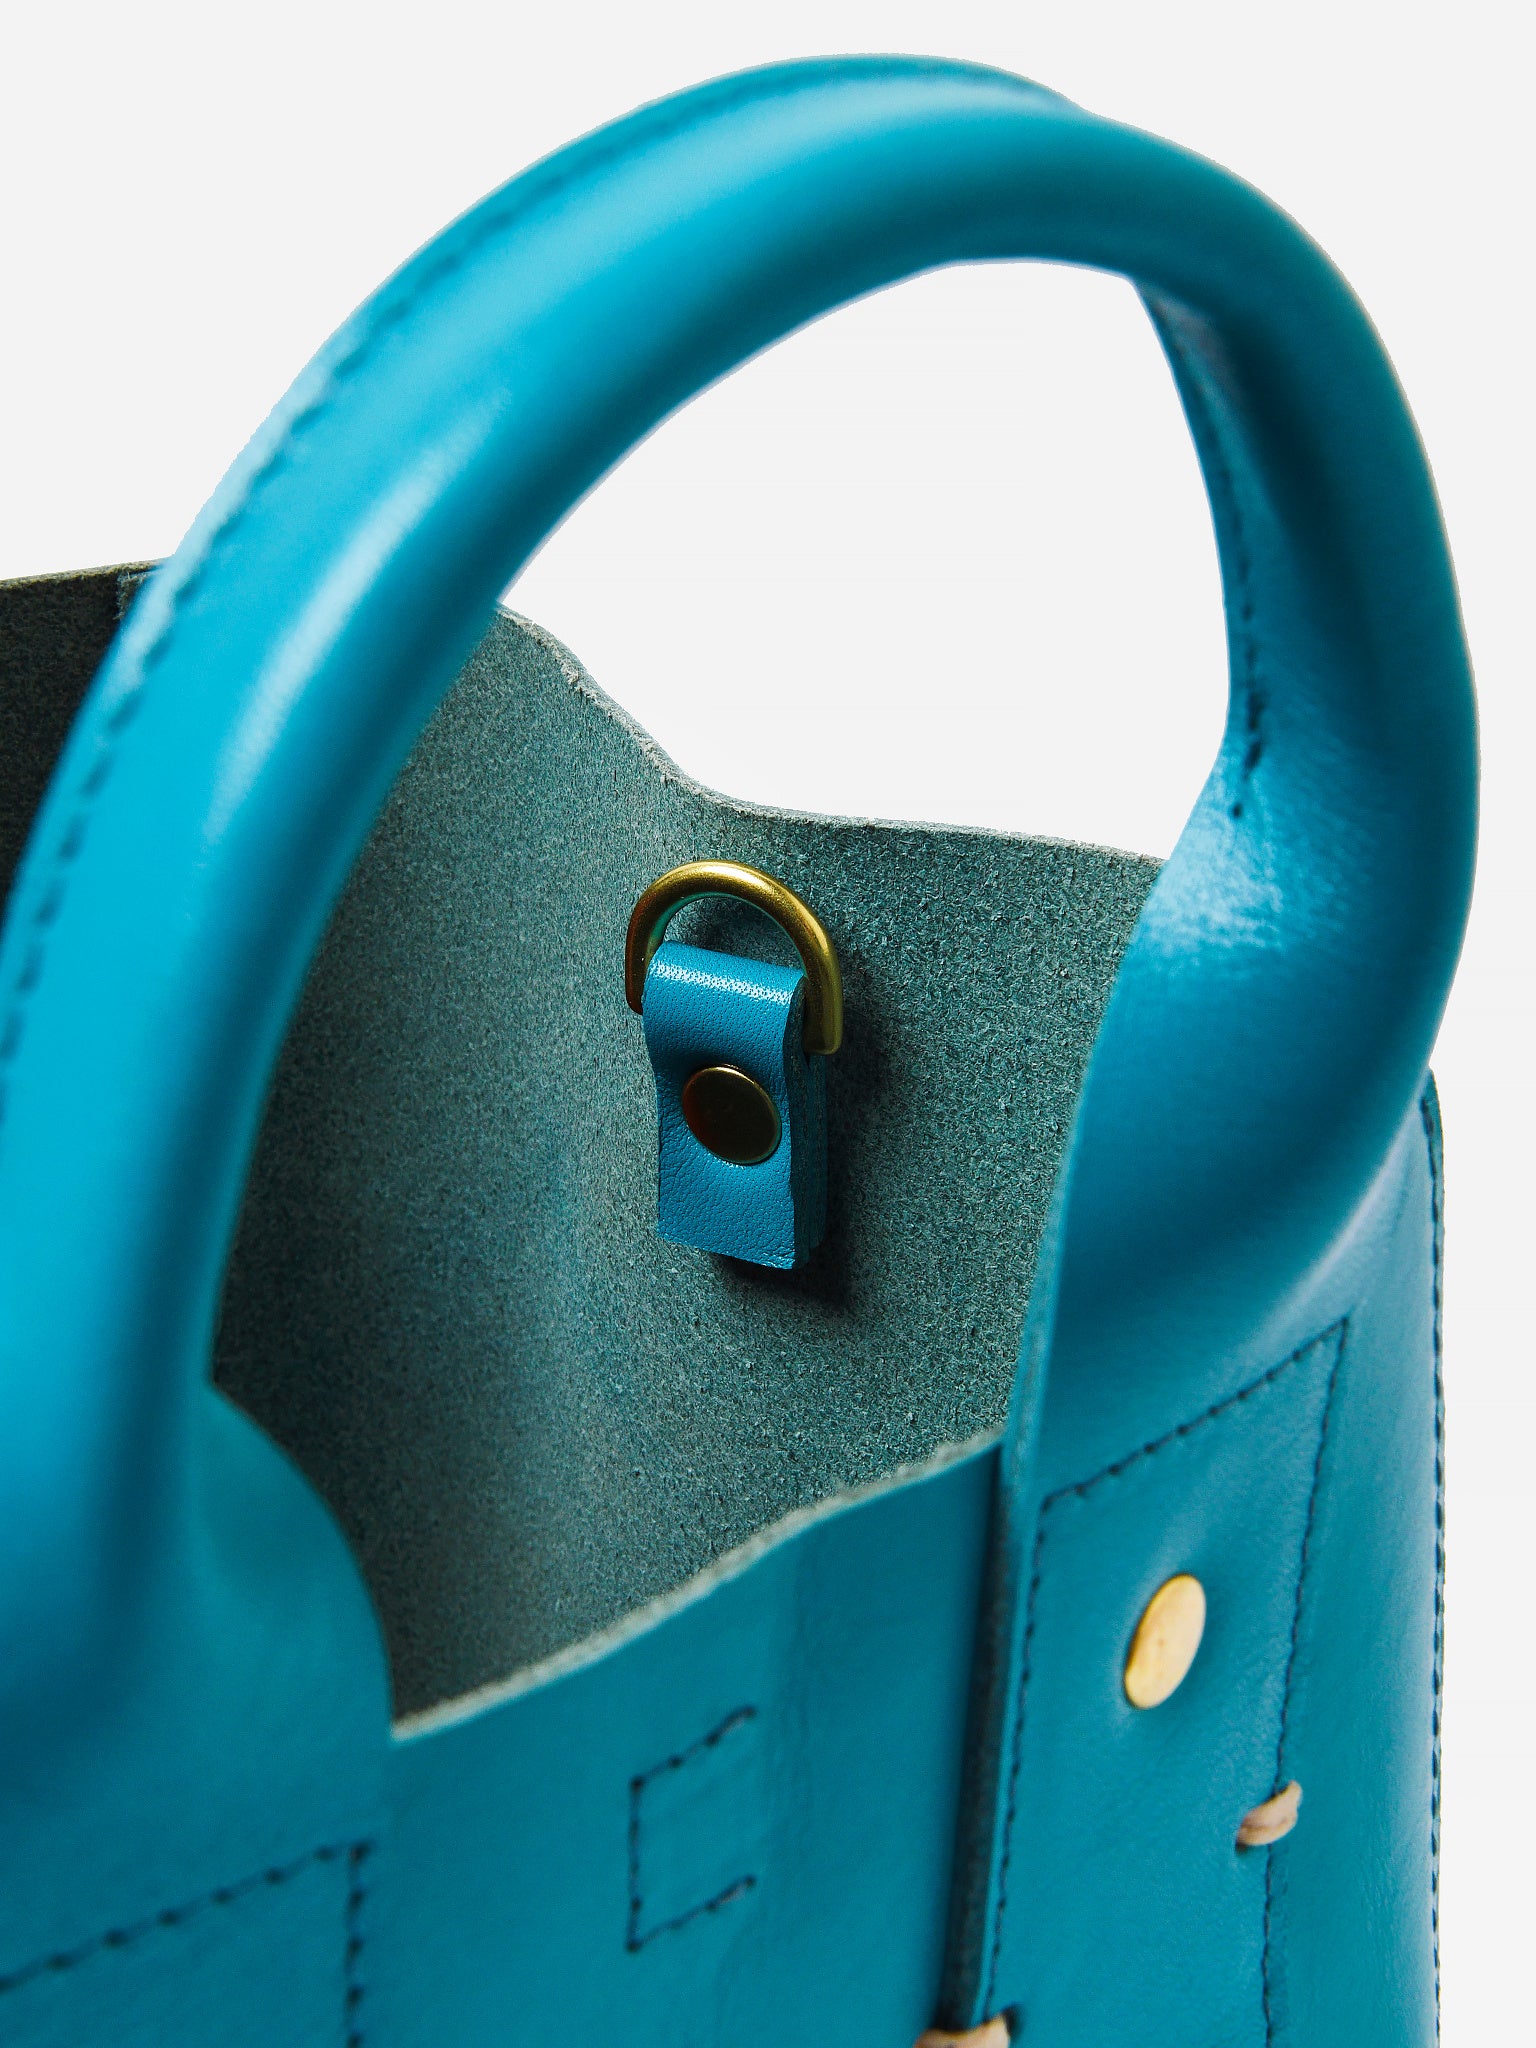 Visit Le Box Tote in Electric Blue Clare V. to find more. Shop for